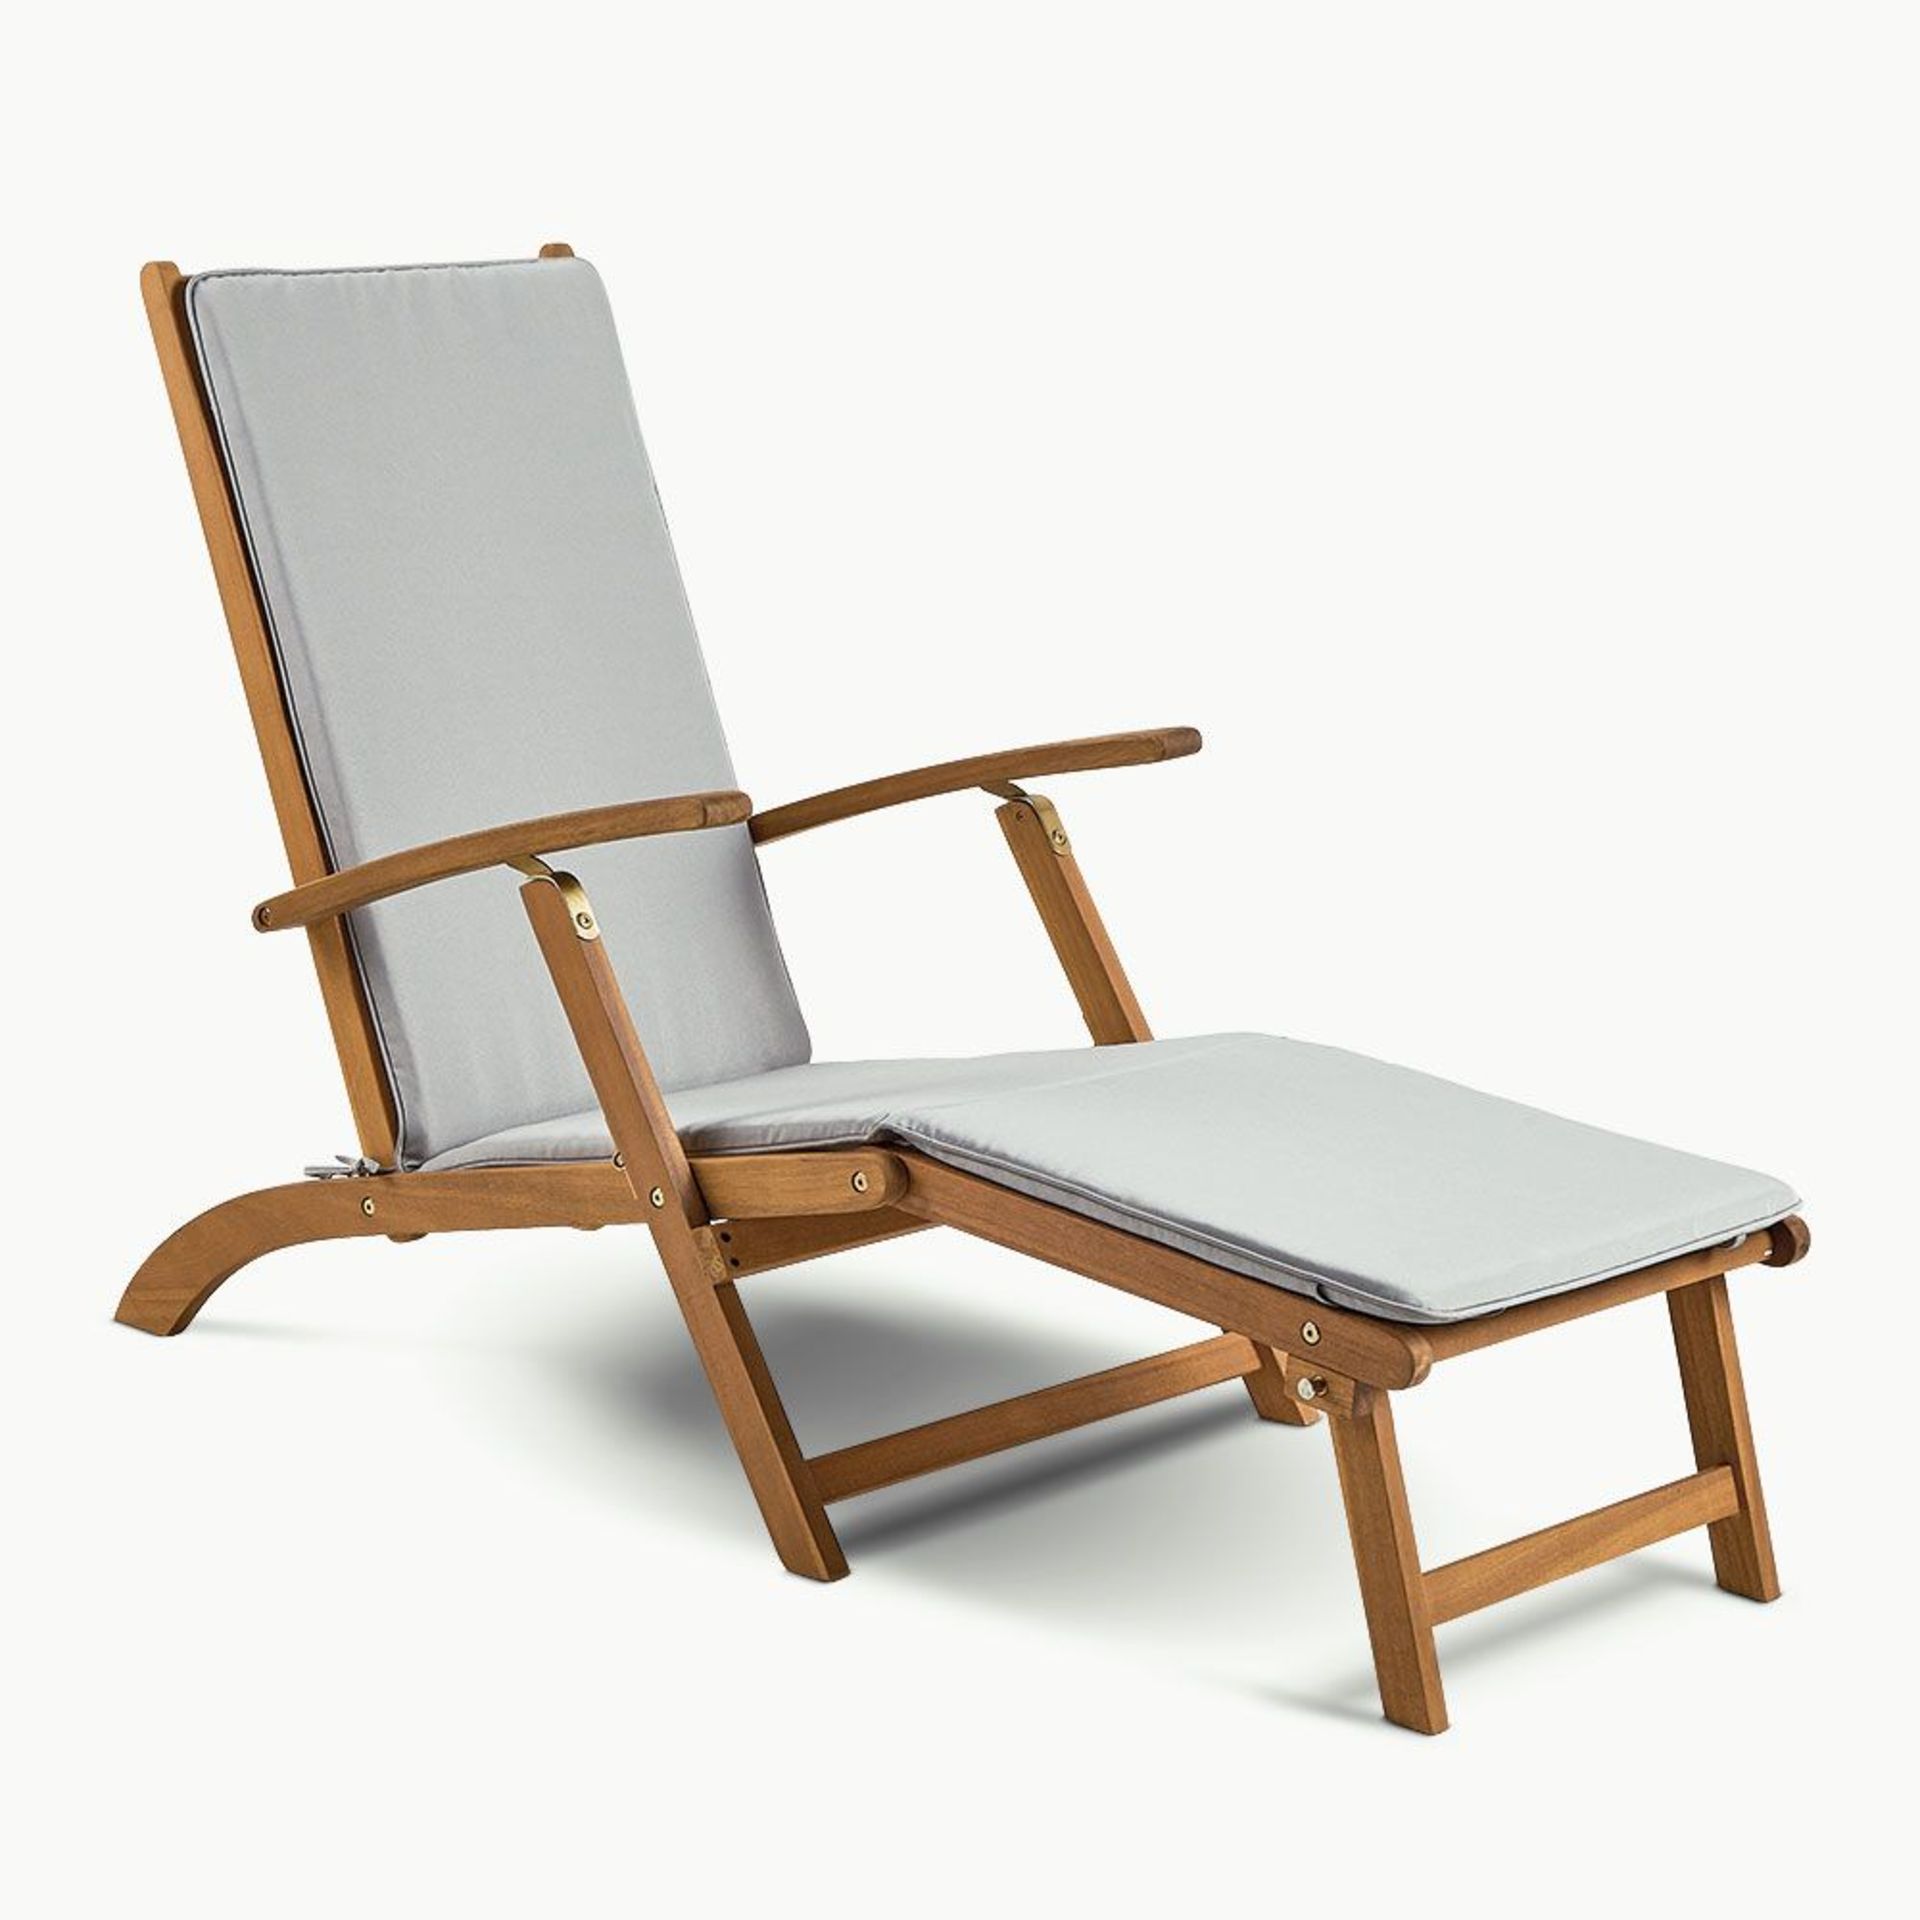 Grey Sun Lounger Chair With Cushion. - BI. Enhance your outdoor space with this charming steamer